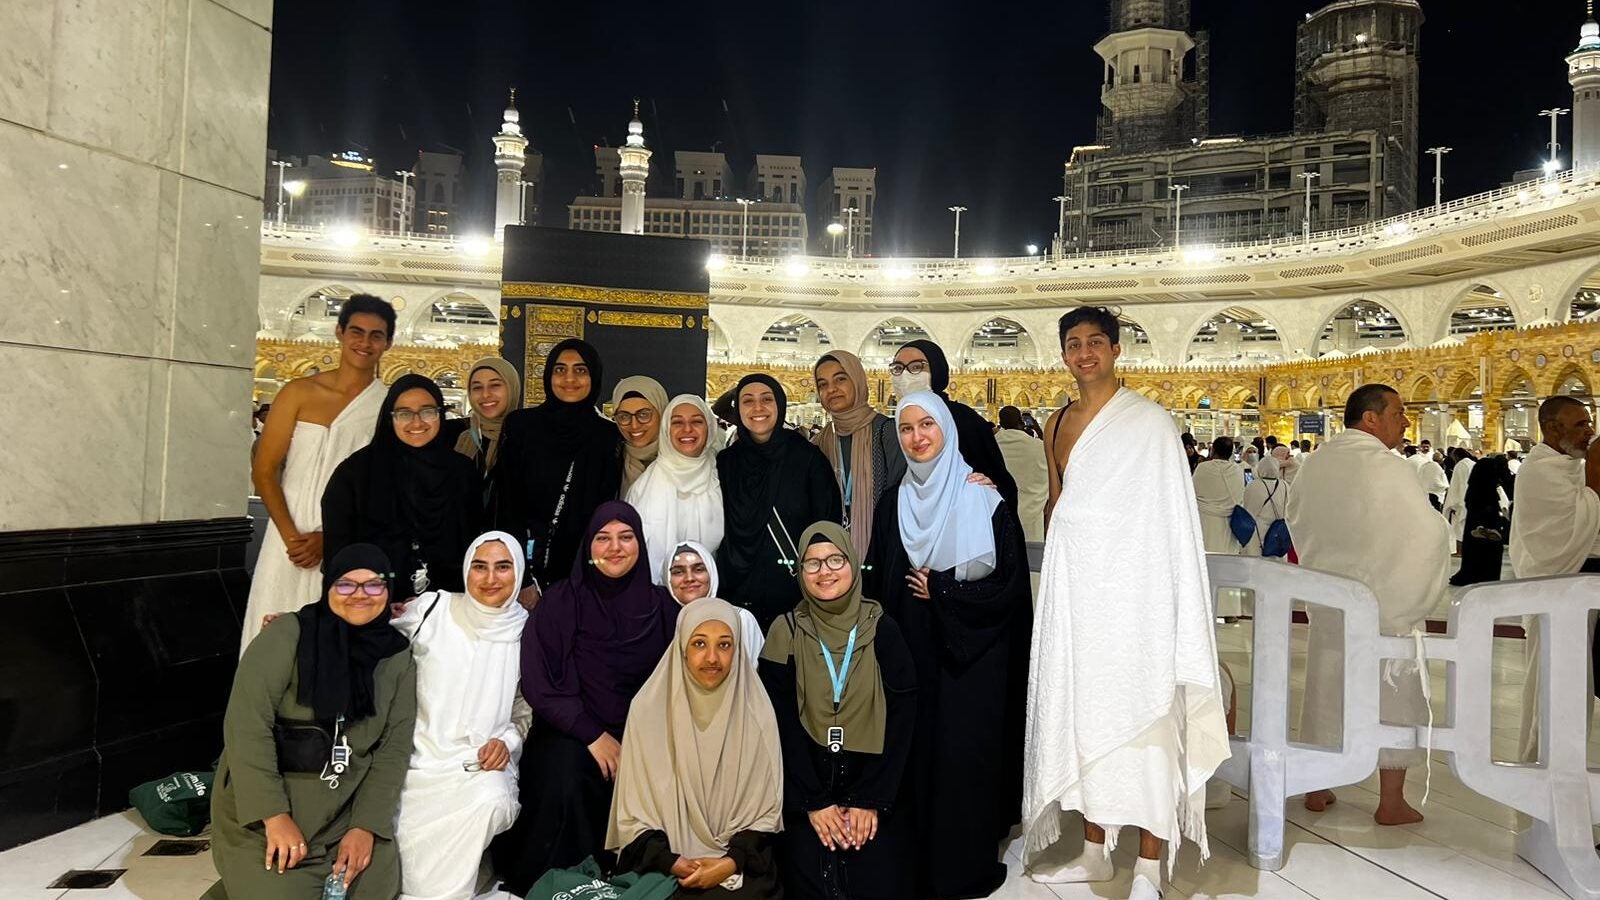 The Kaaba a stone building at the center of Islam's most important mosque and holiest site stands behind a group of muslim women with two muslim